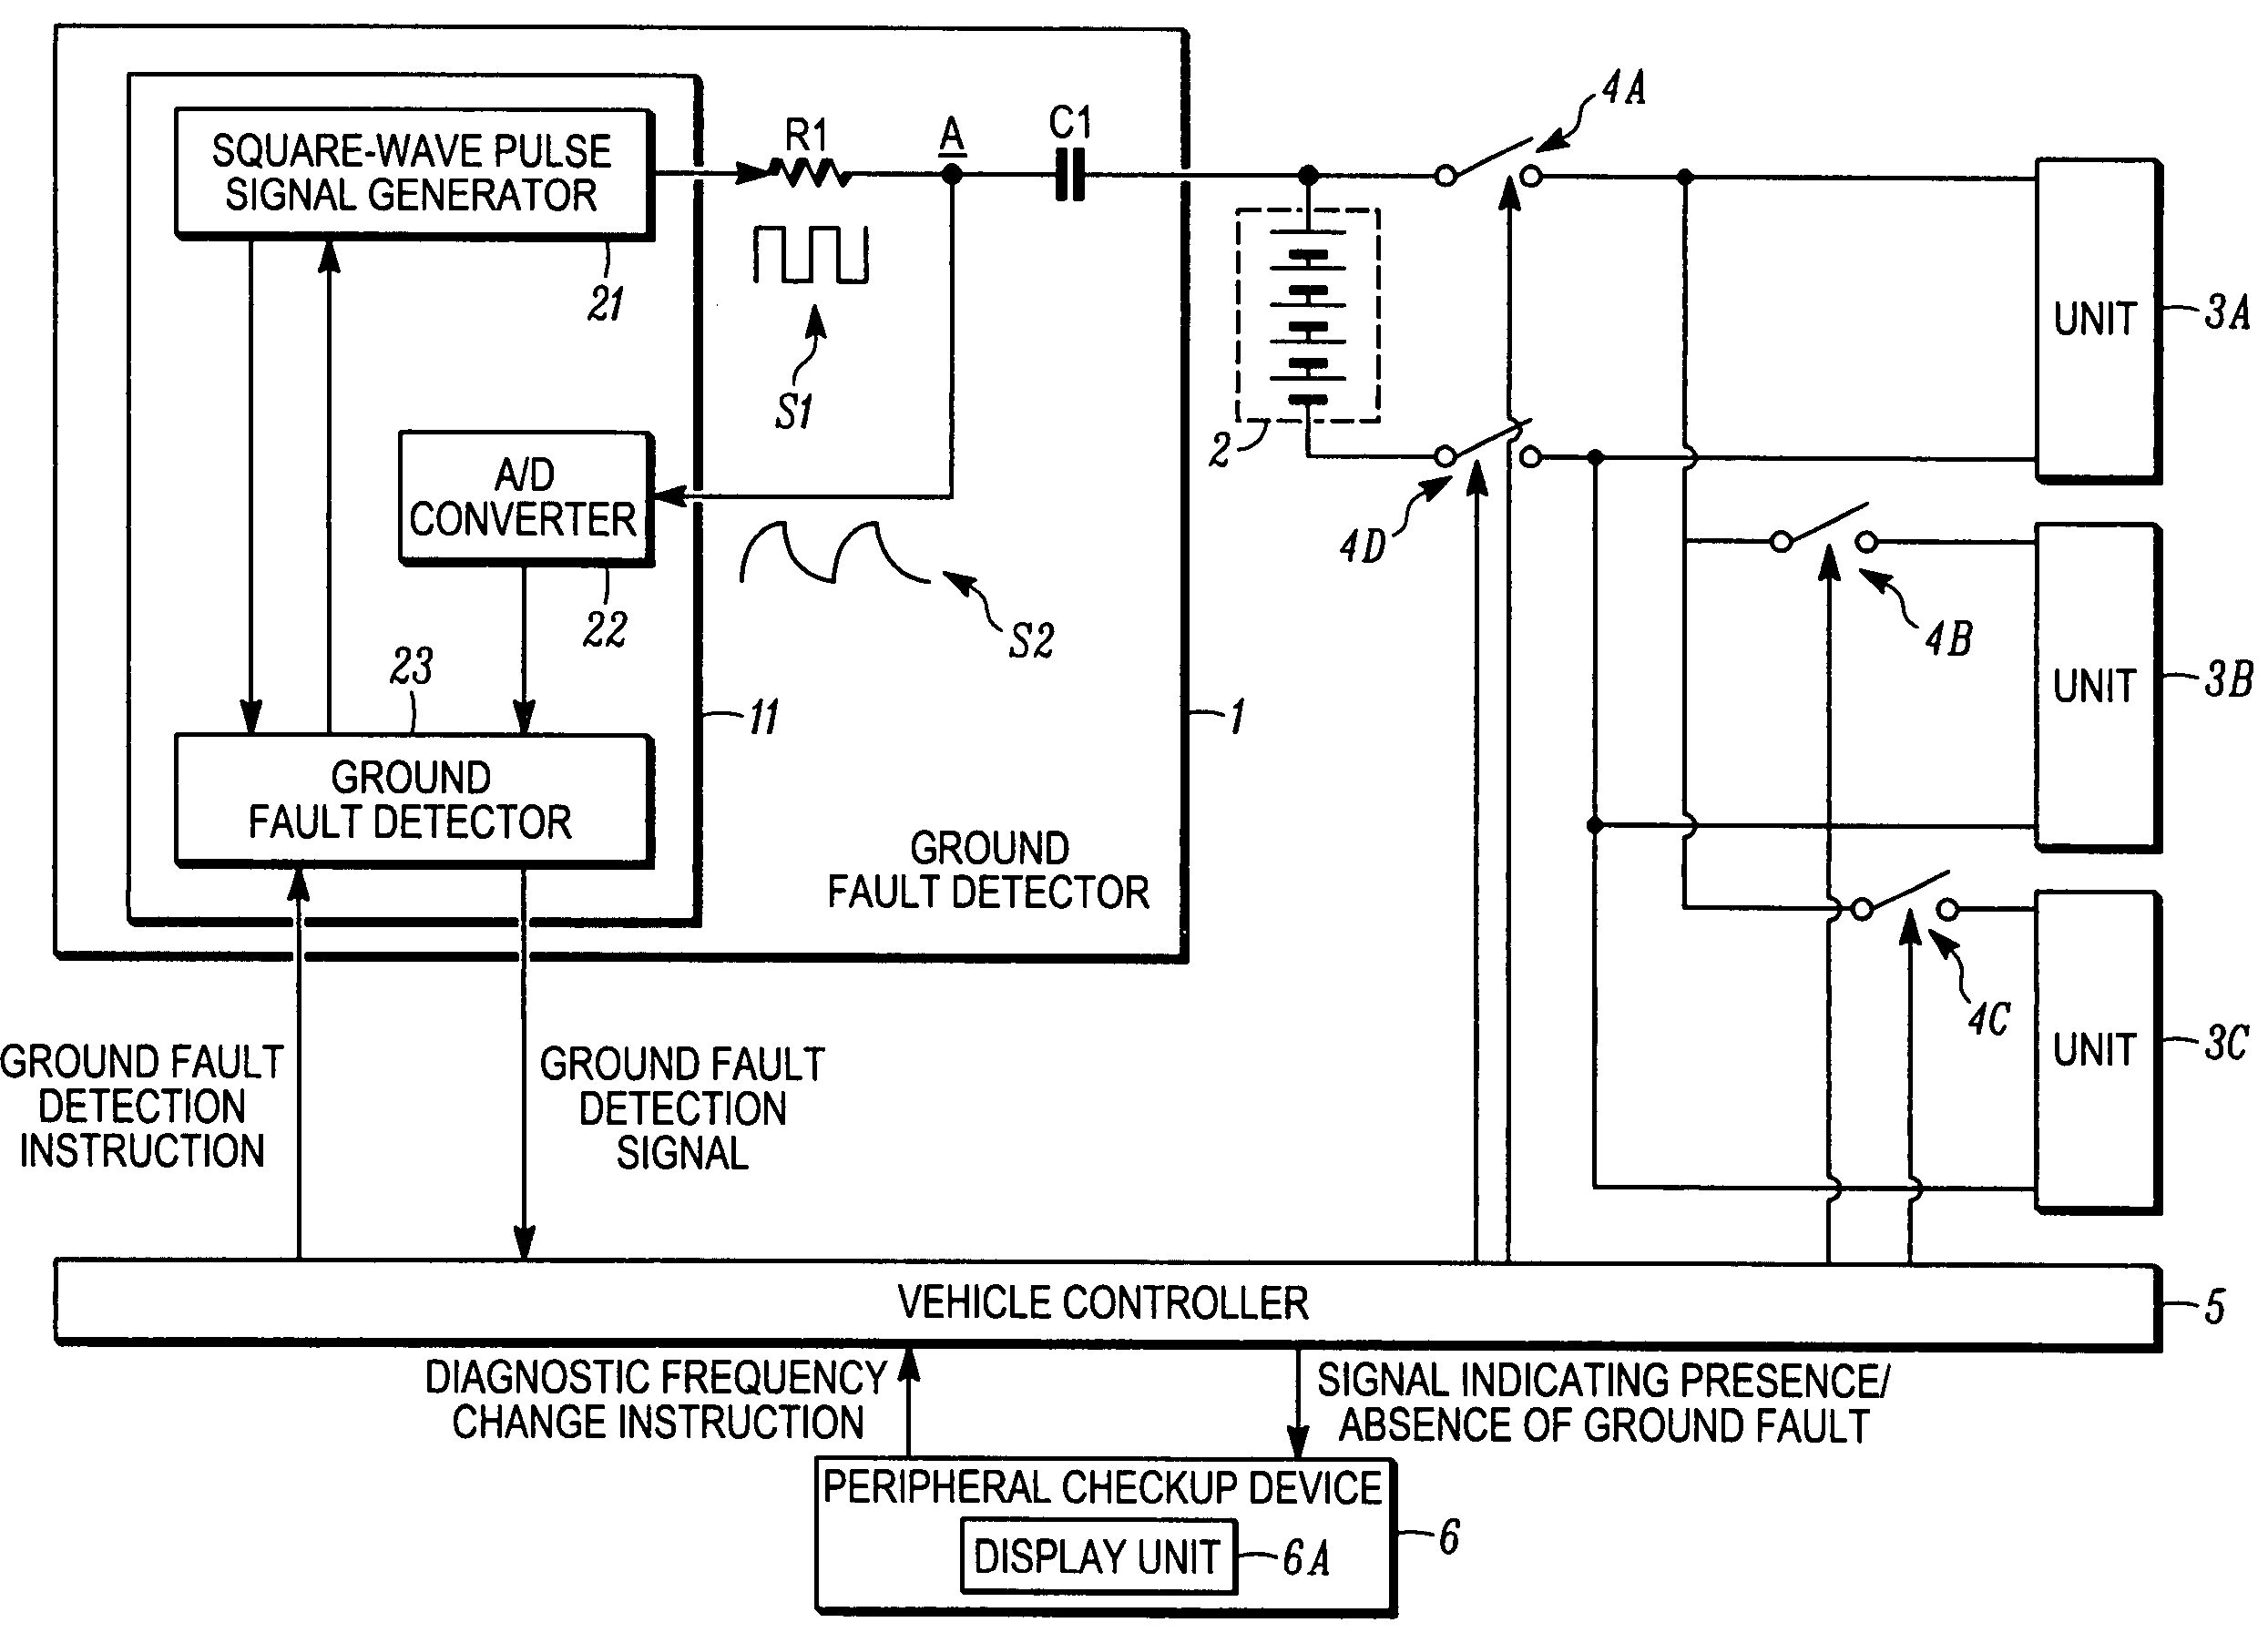 Ground fault detector for vehicle